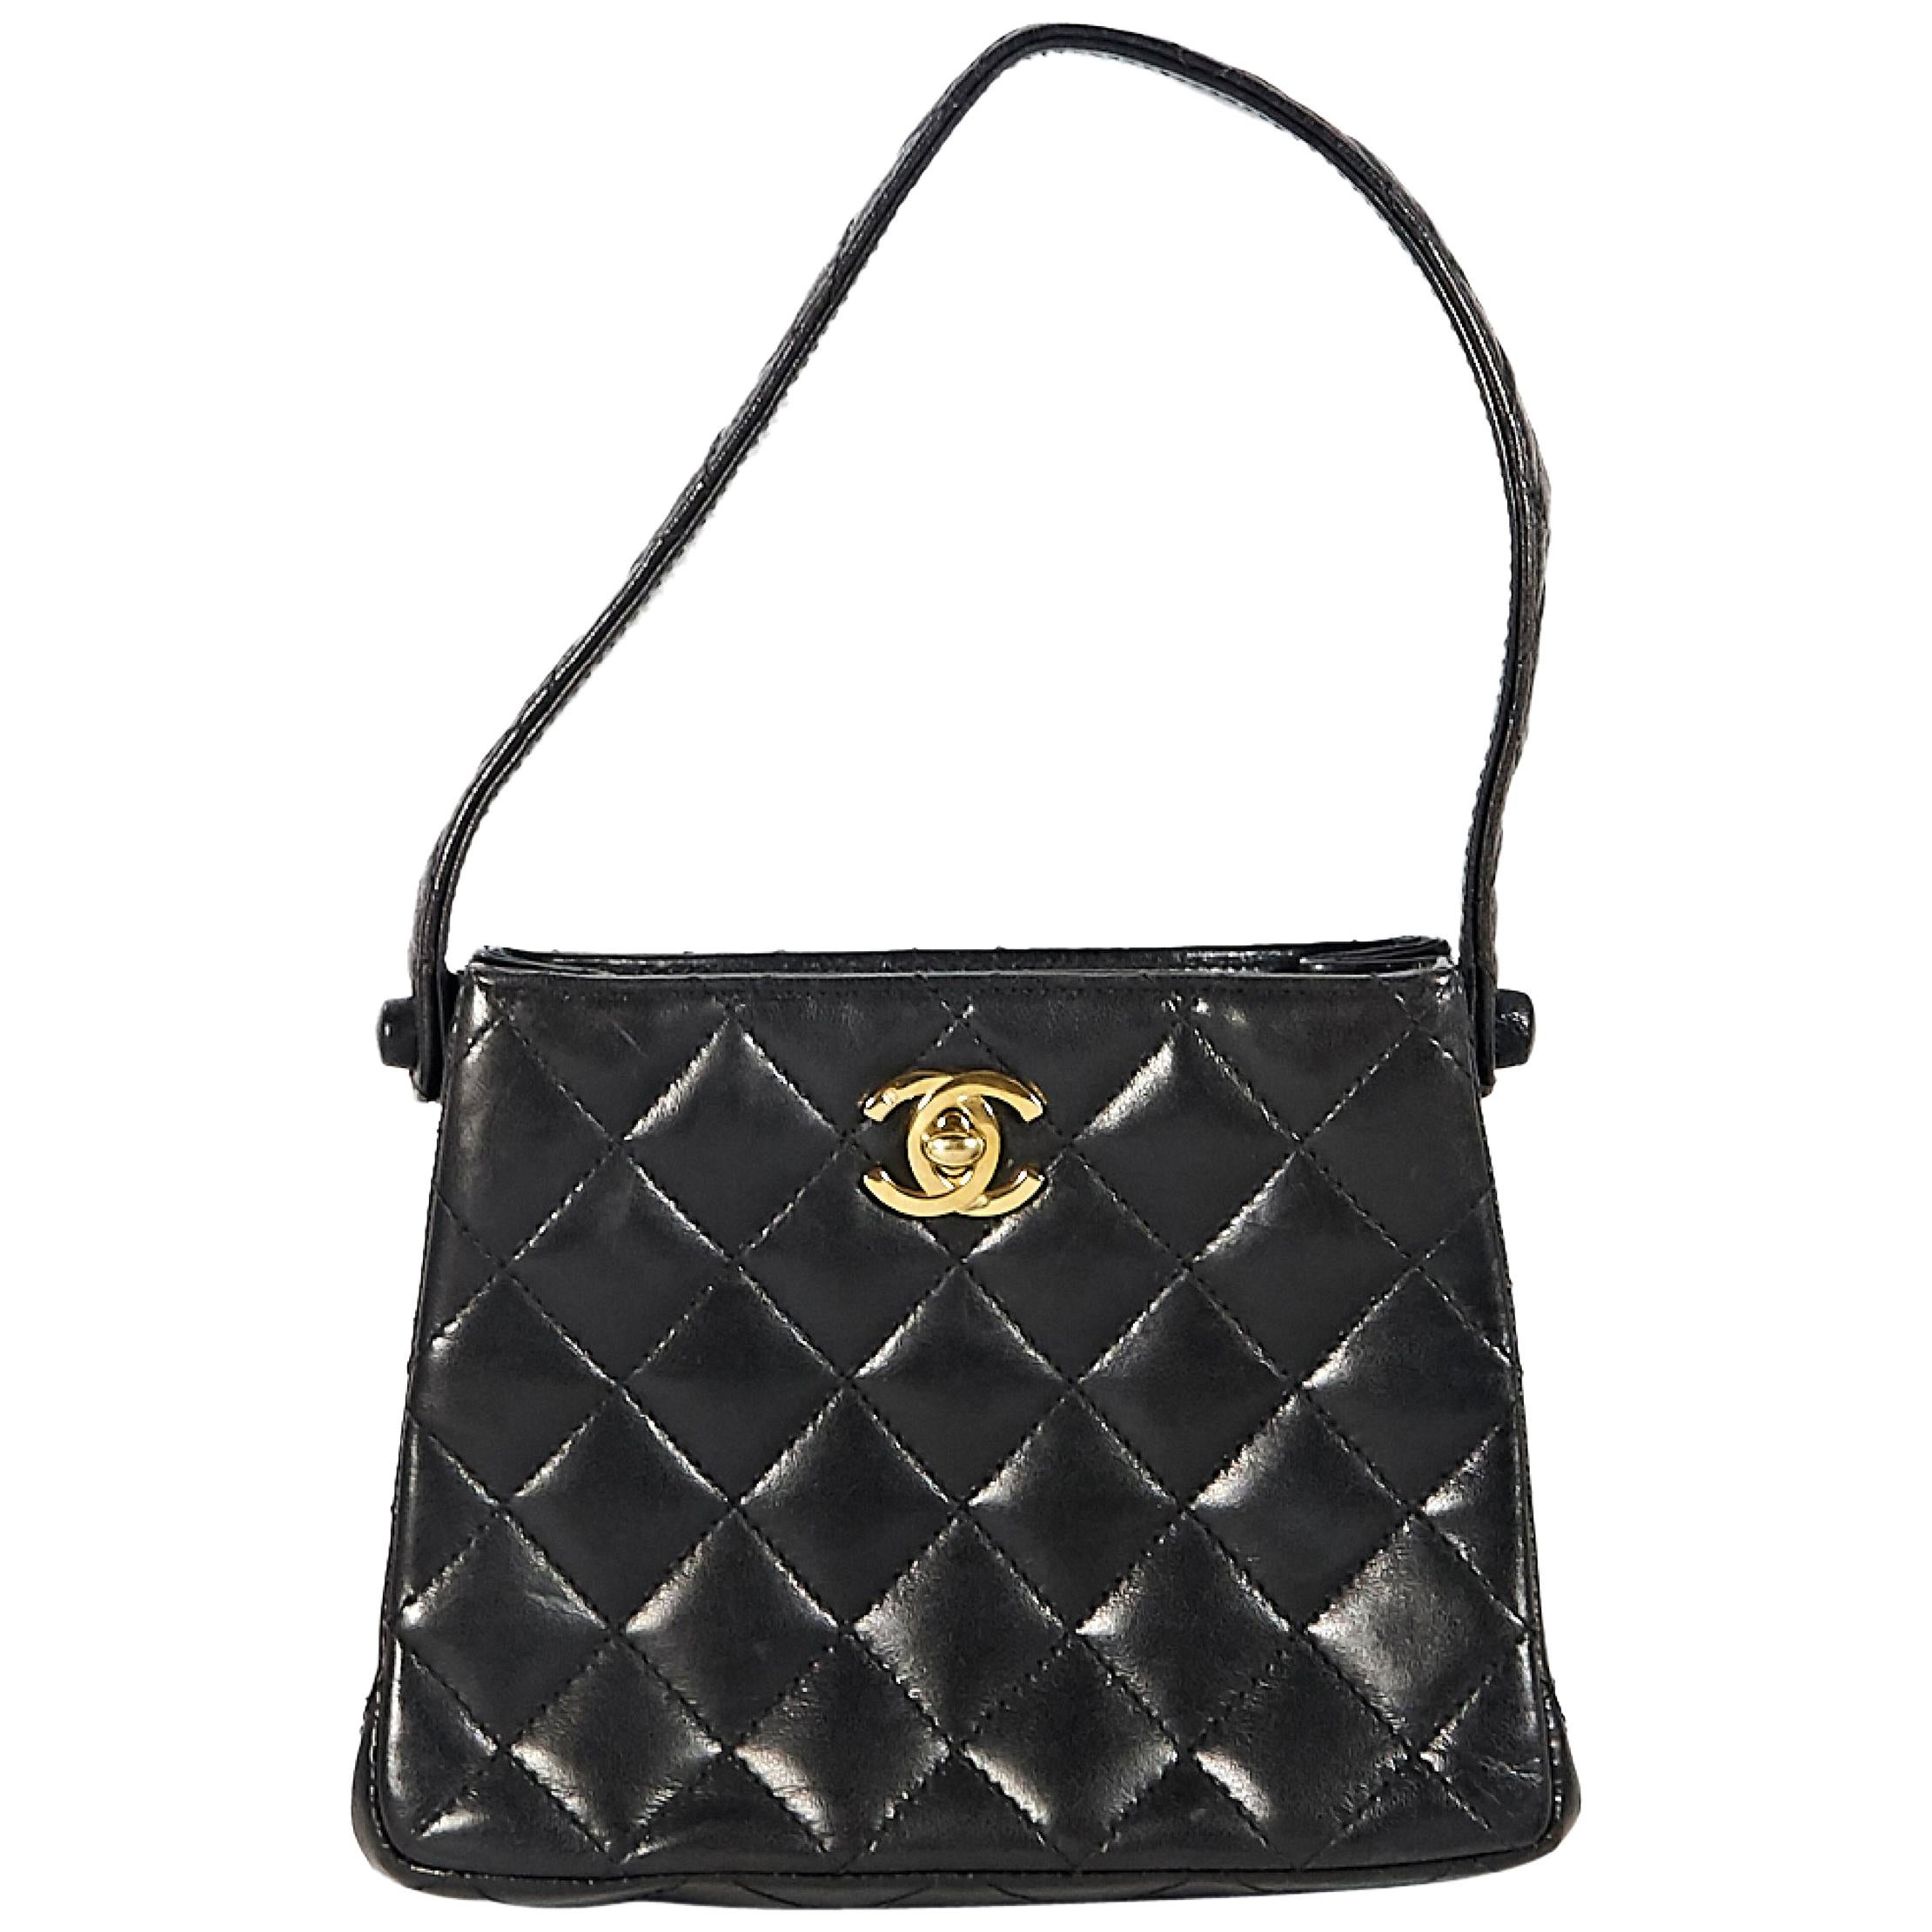 Chanel Black Quilted Leather Mini Evening Bag